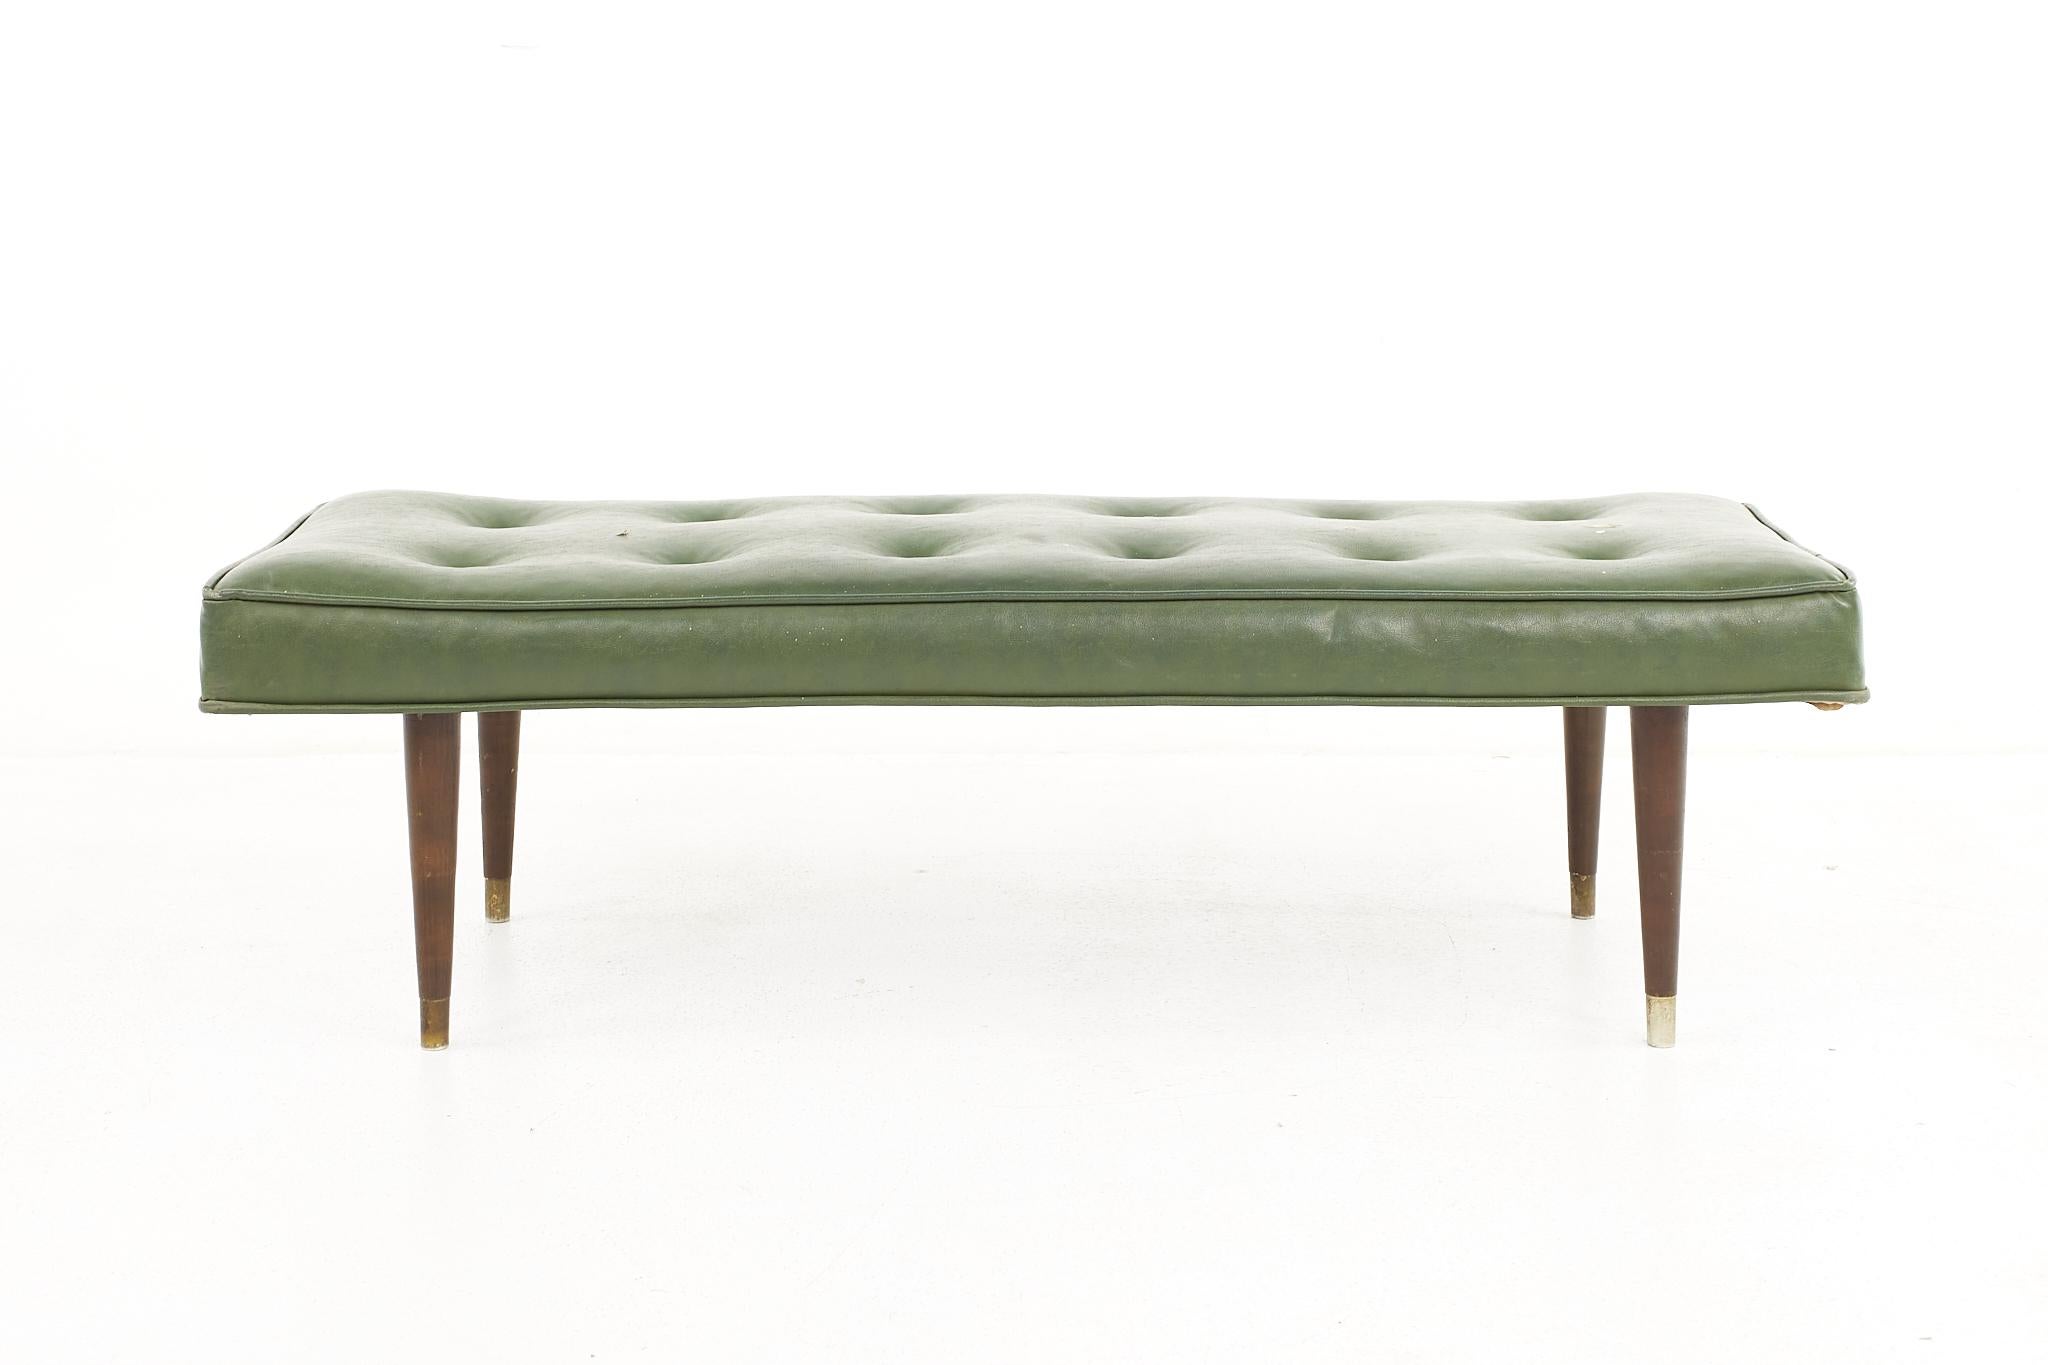 Milo Baughman style mid century tufted bench

The bench measures: 48 wide x 18 deep x 13.5 high, with a seat height of 13.5 

All pieces of furniture can be had in what we call restored vintage condition. That means the piece is restored upon